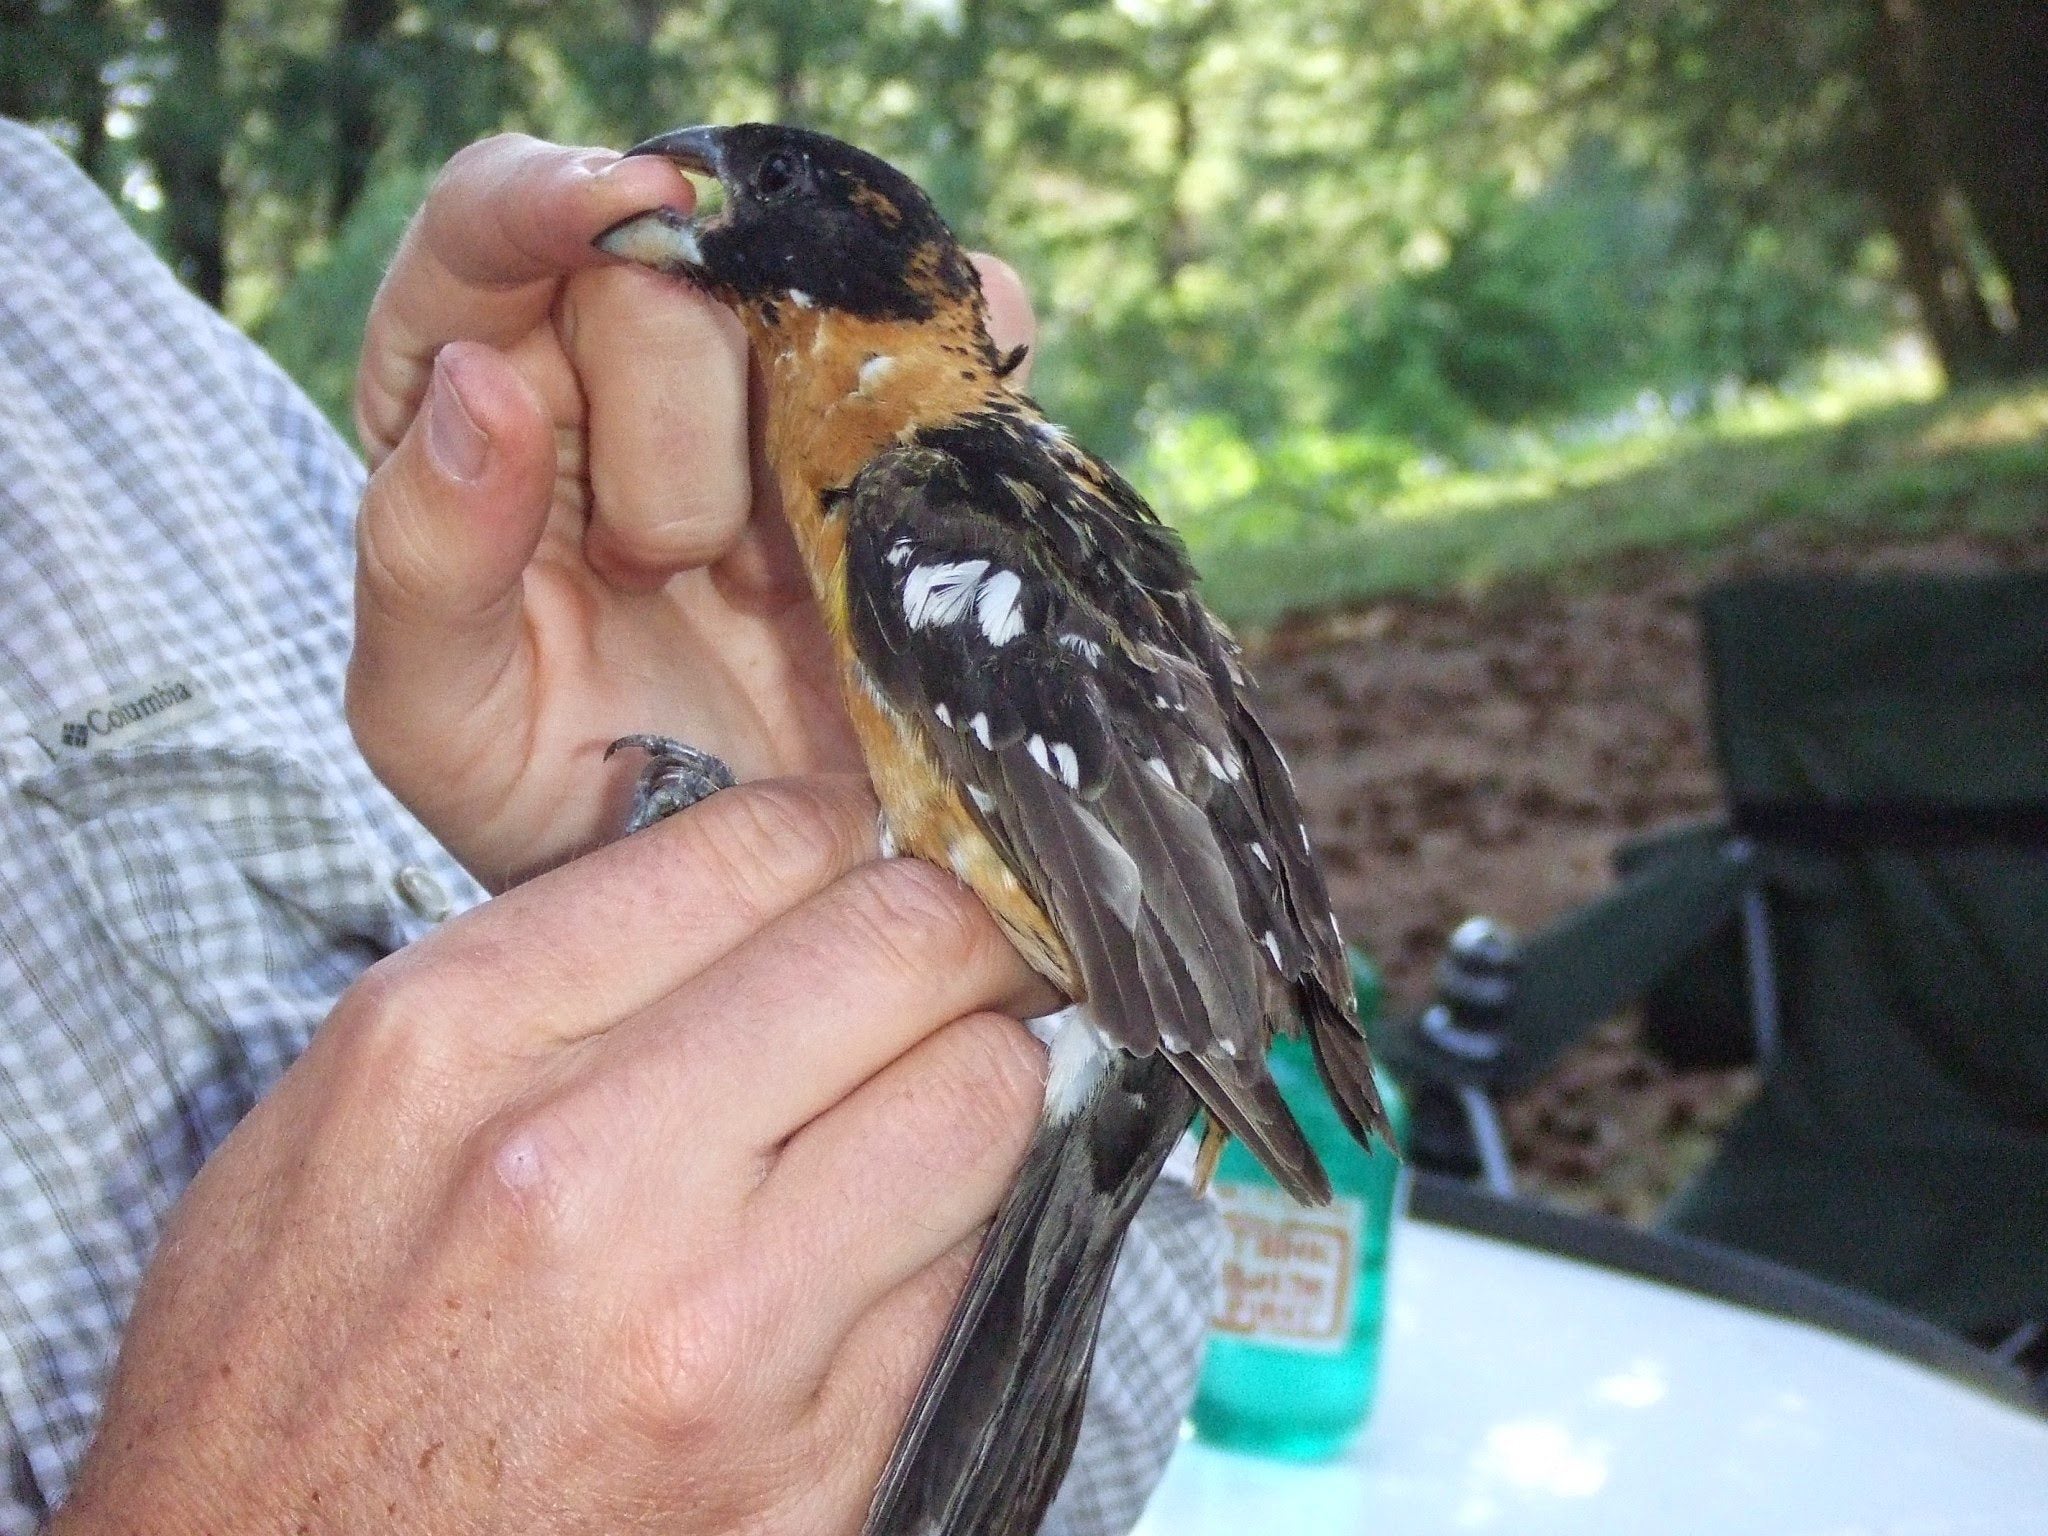 biologist holds a grosbeak, bird is stretching out its neck and chomping on the biologist's index finger